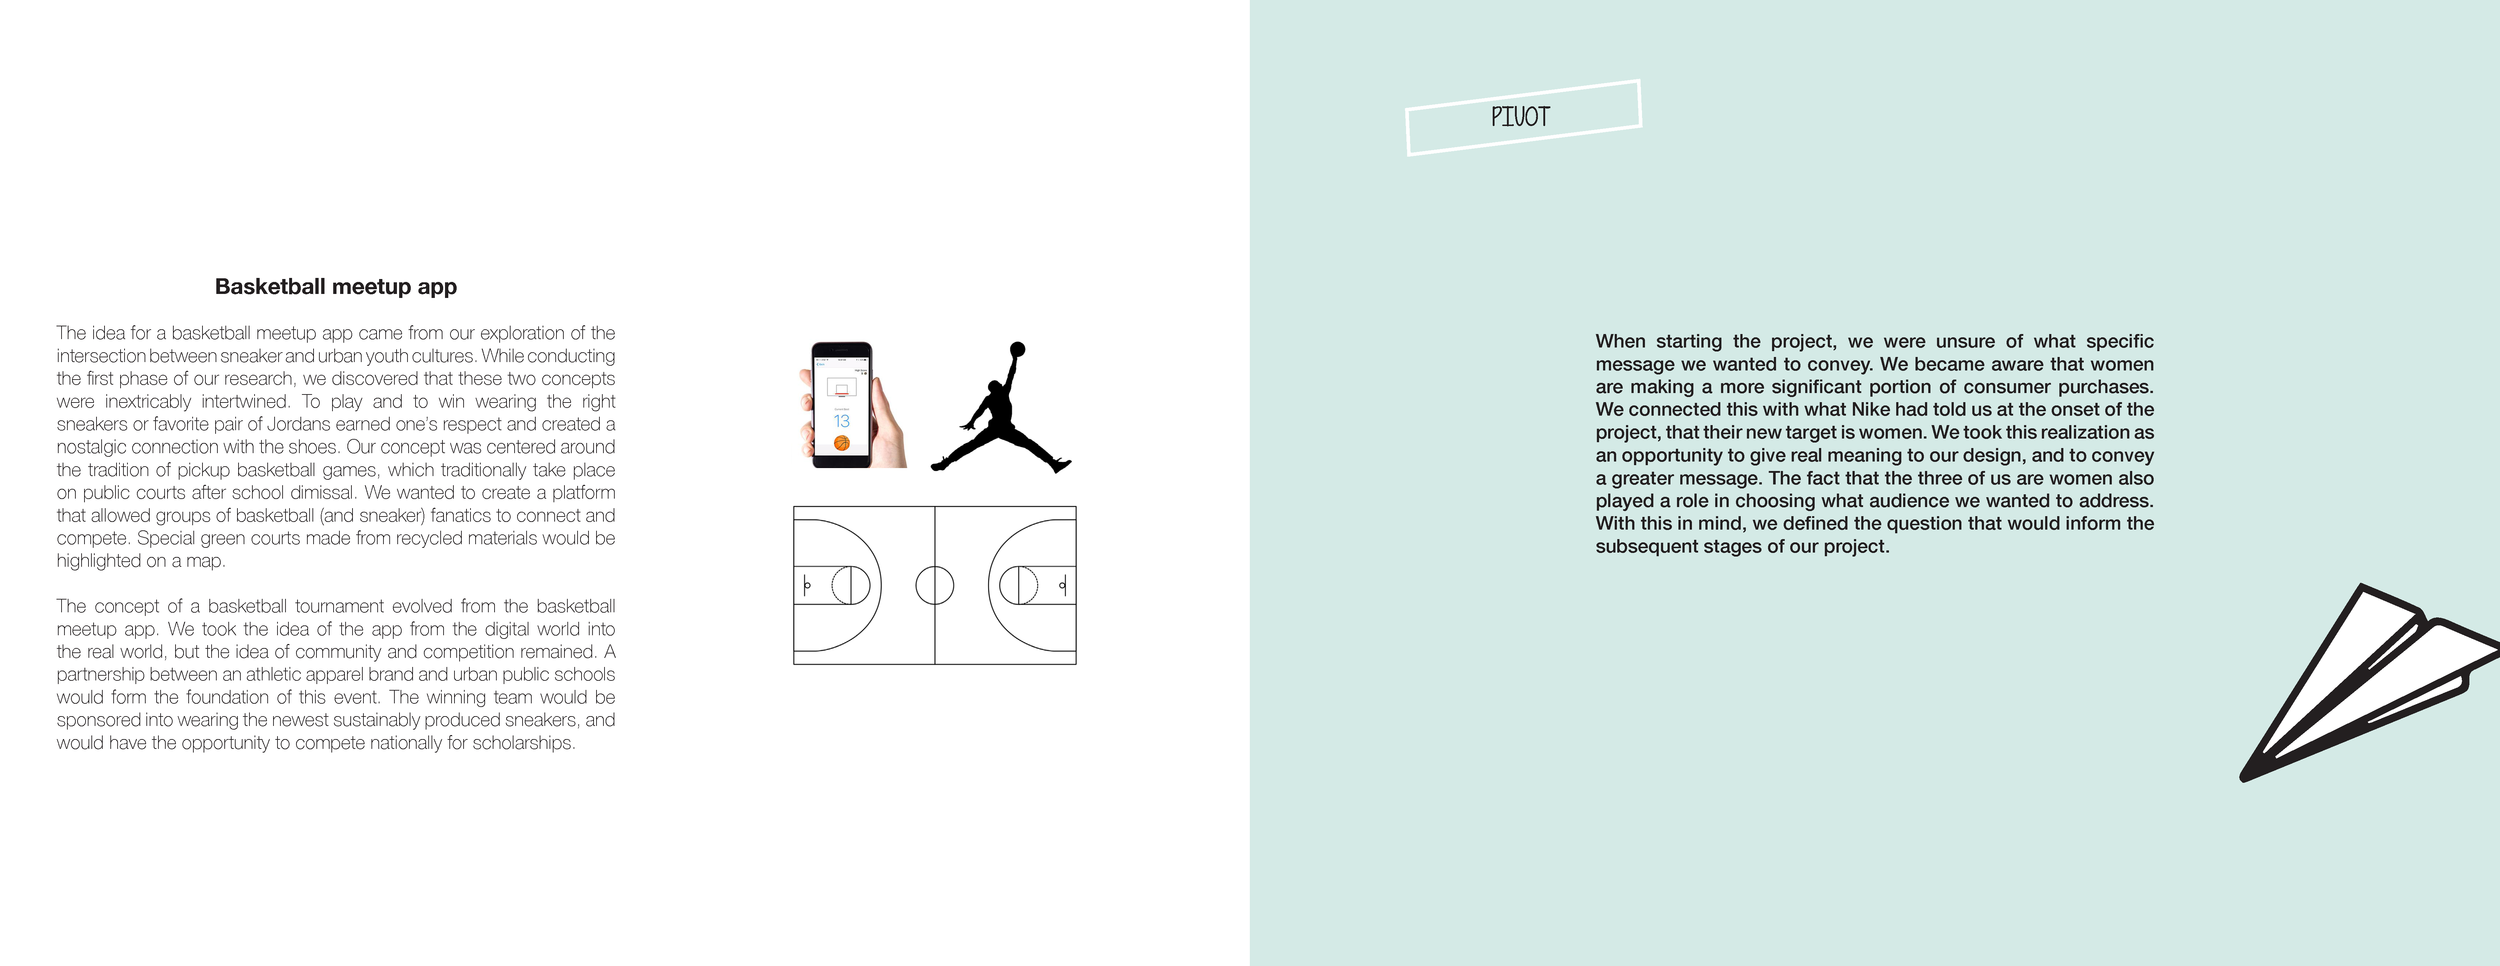 NIKE PROJECT_Page_15.png